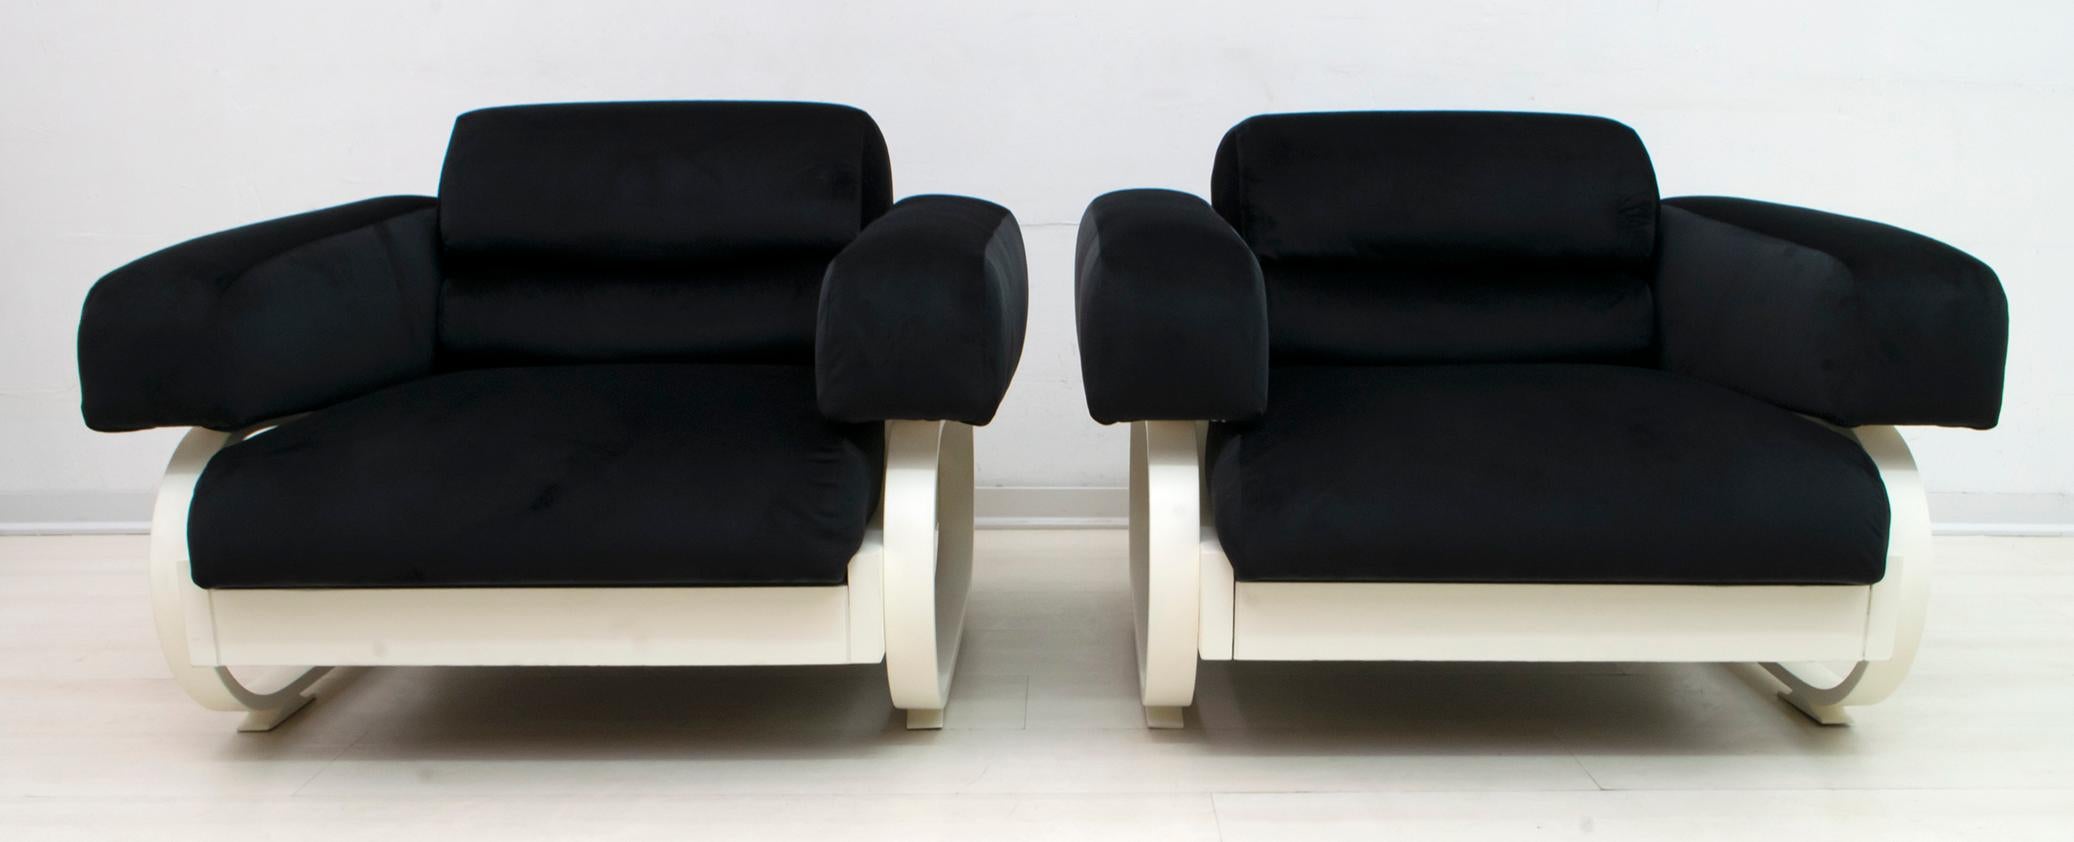 This pair of armchairs, typical Italian design of the 1960s, has been restored and reupholstered in black velvet.